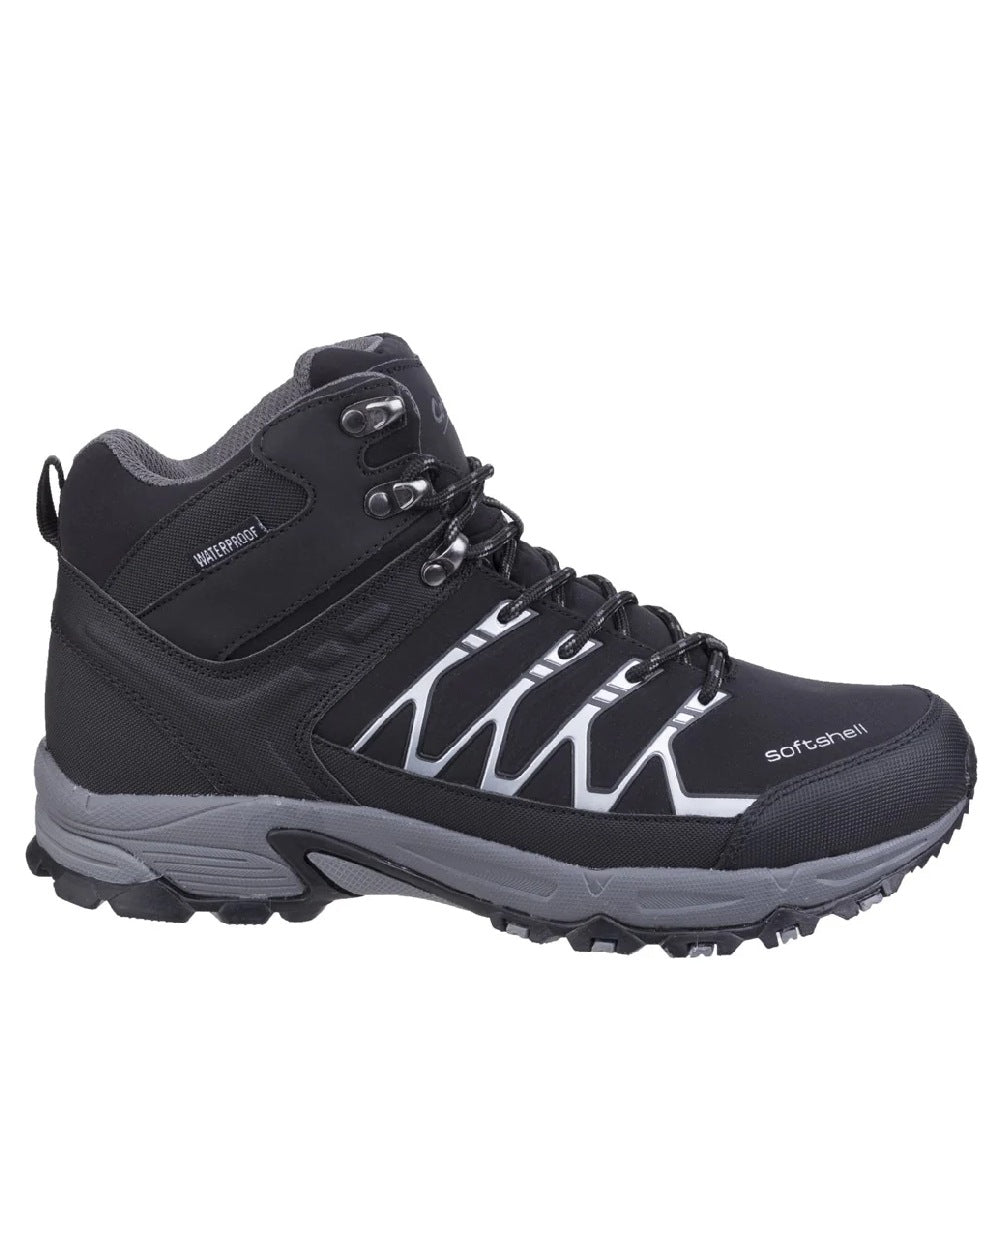 Black coloured Cotswold Mens Abbeydale Mid Hiking Boots on white background 